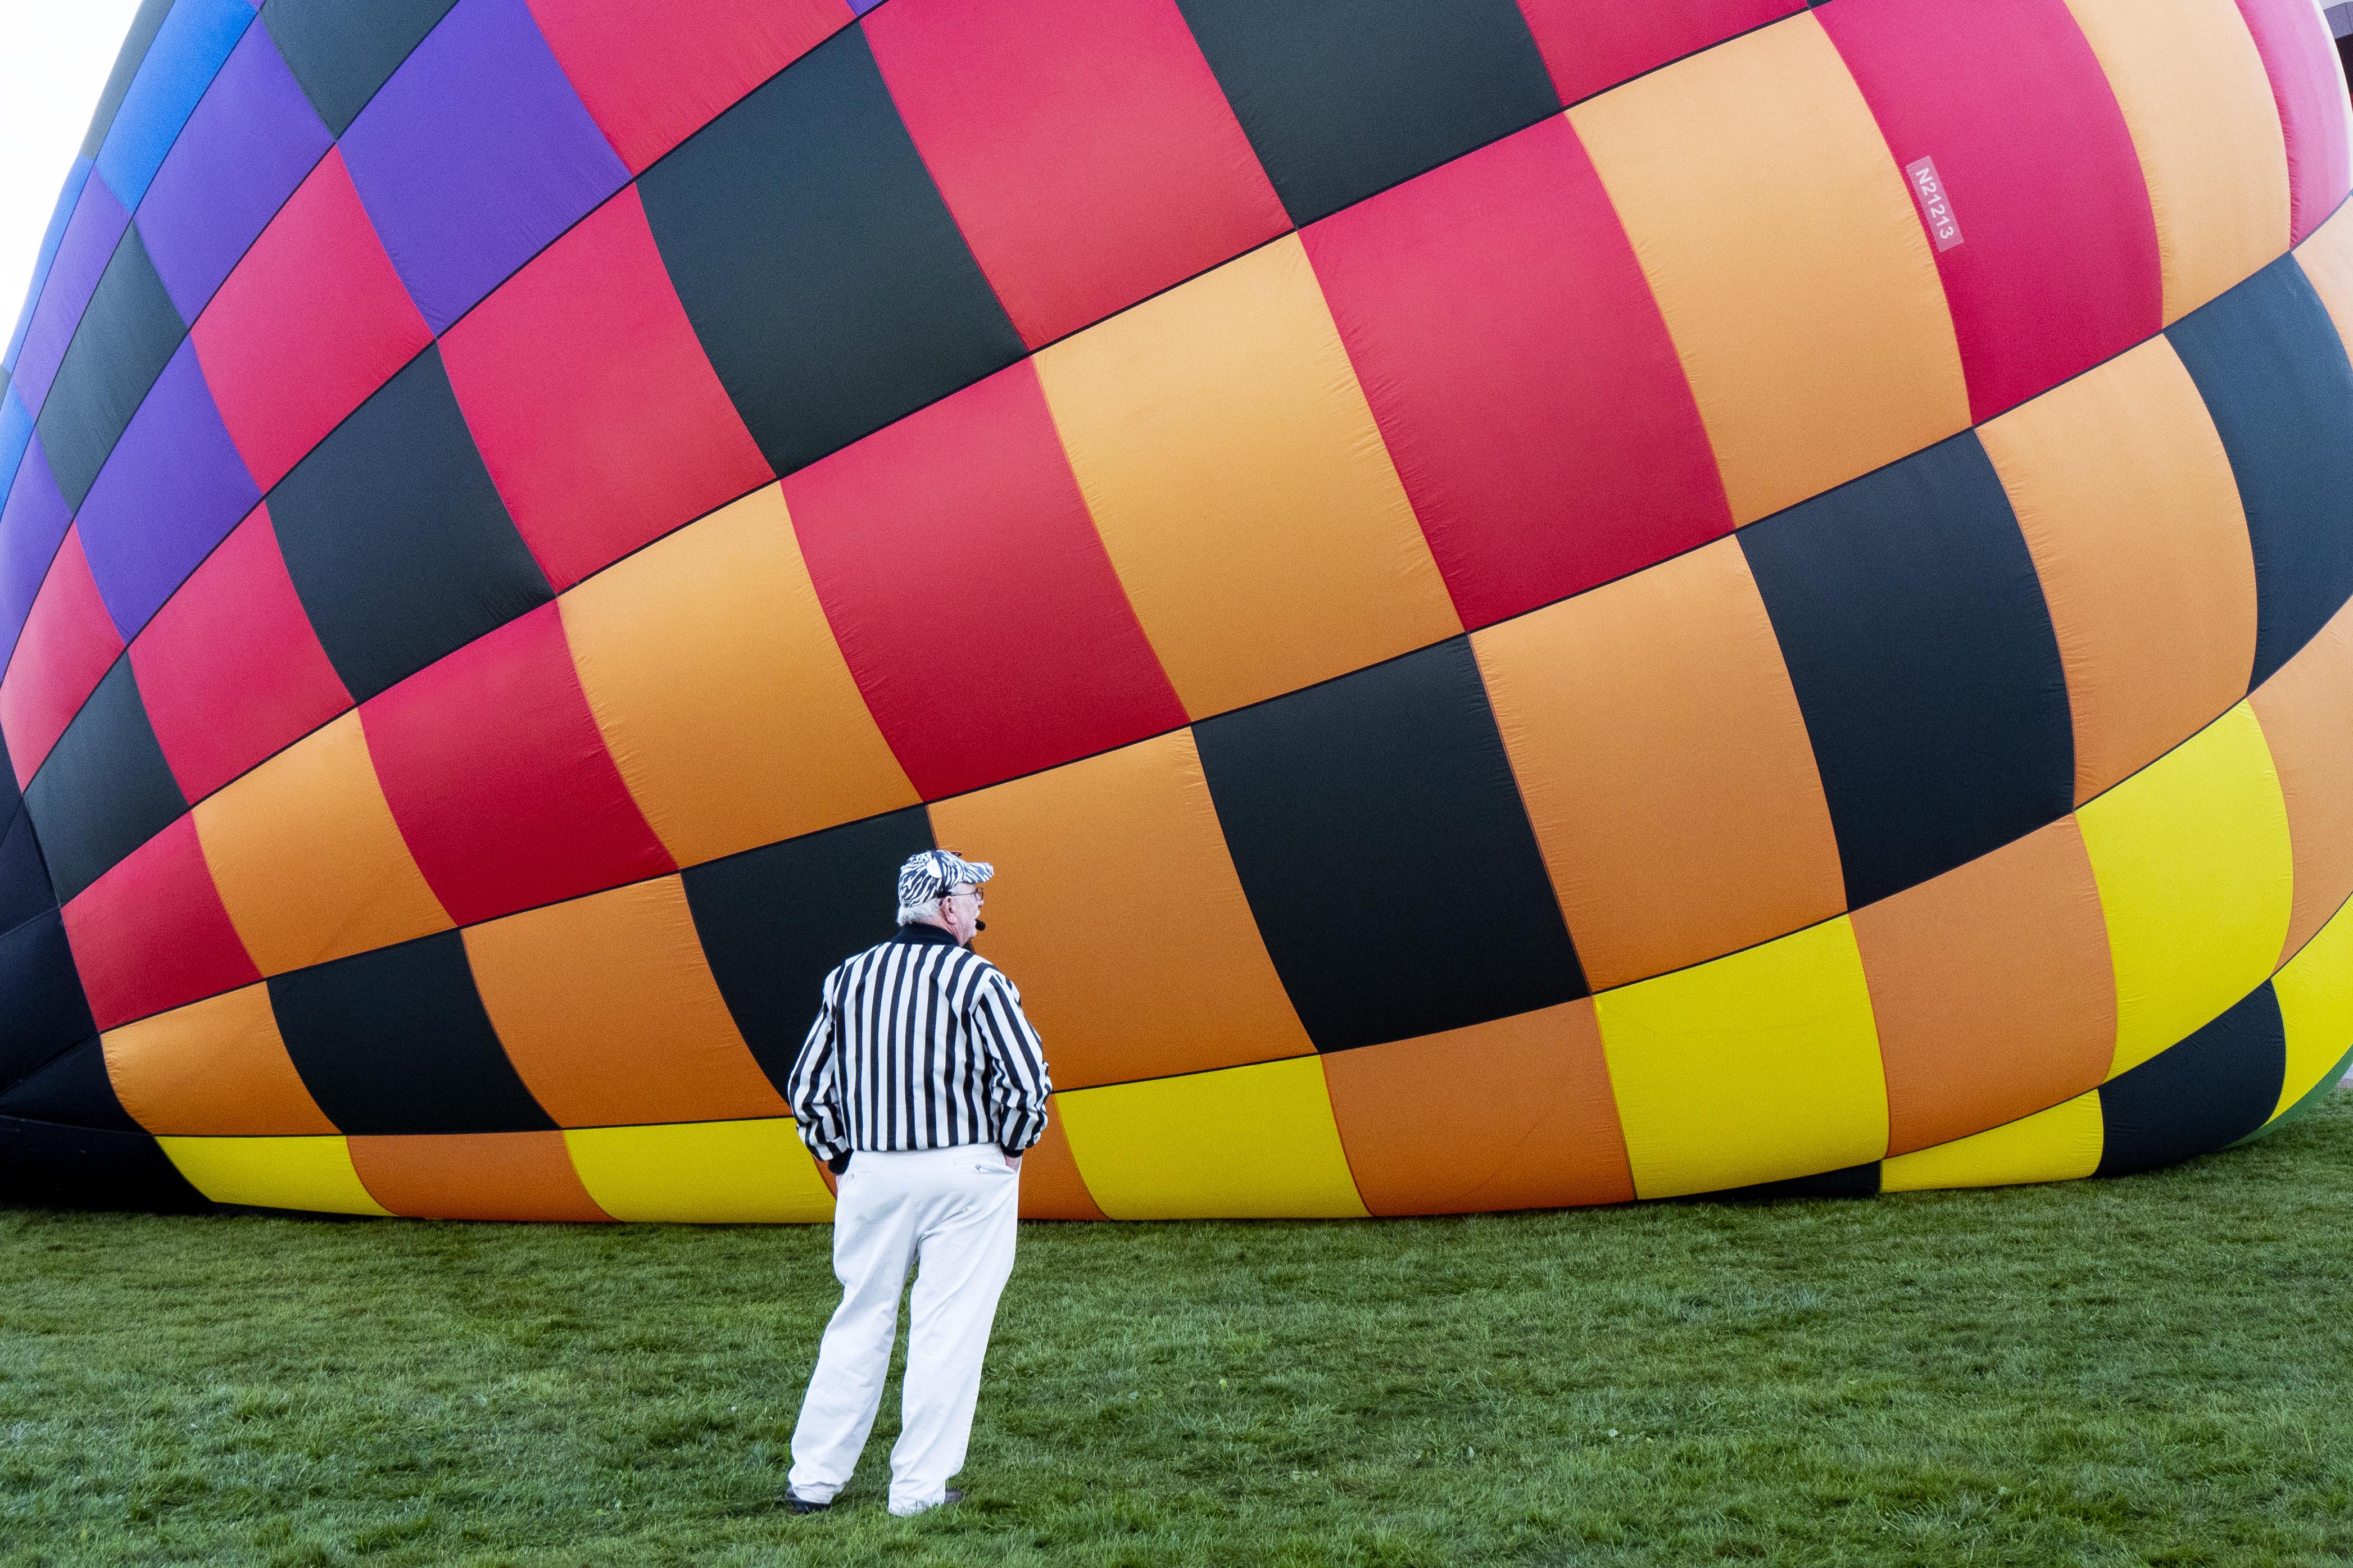 A launch coordinator wearing a black and white striped referee shirt watches a hot air balloon inflate on its side on the grass during the 2018 Albuquerque International Balloon Fiesta